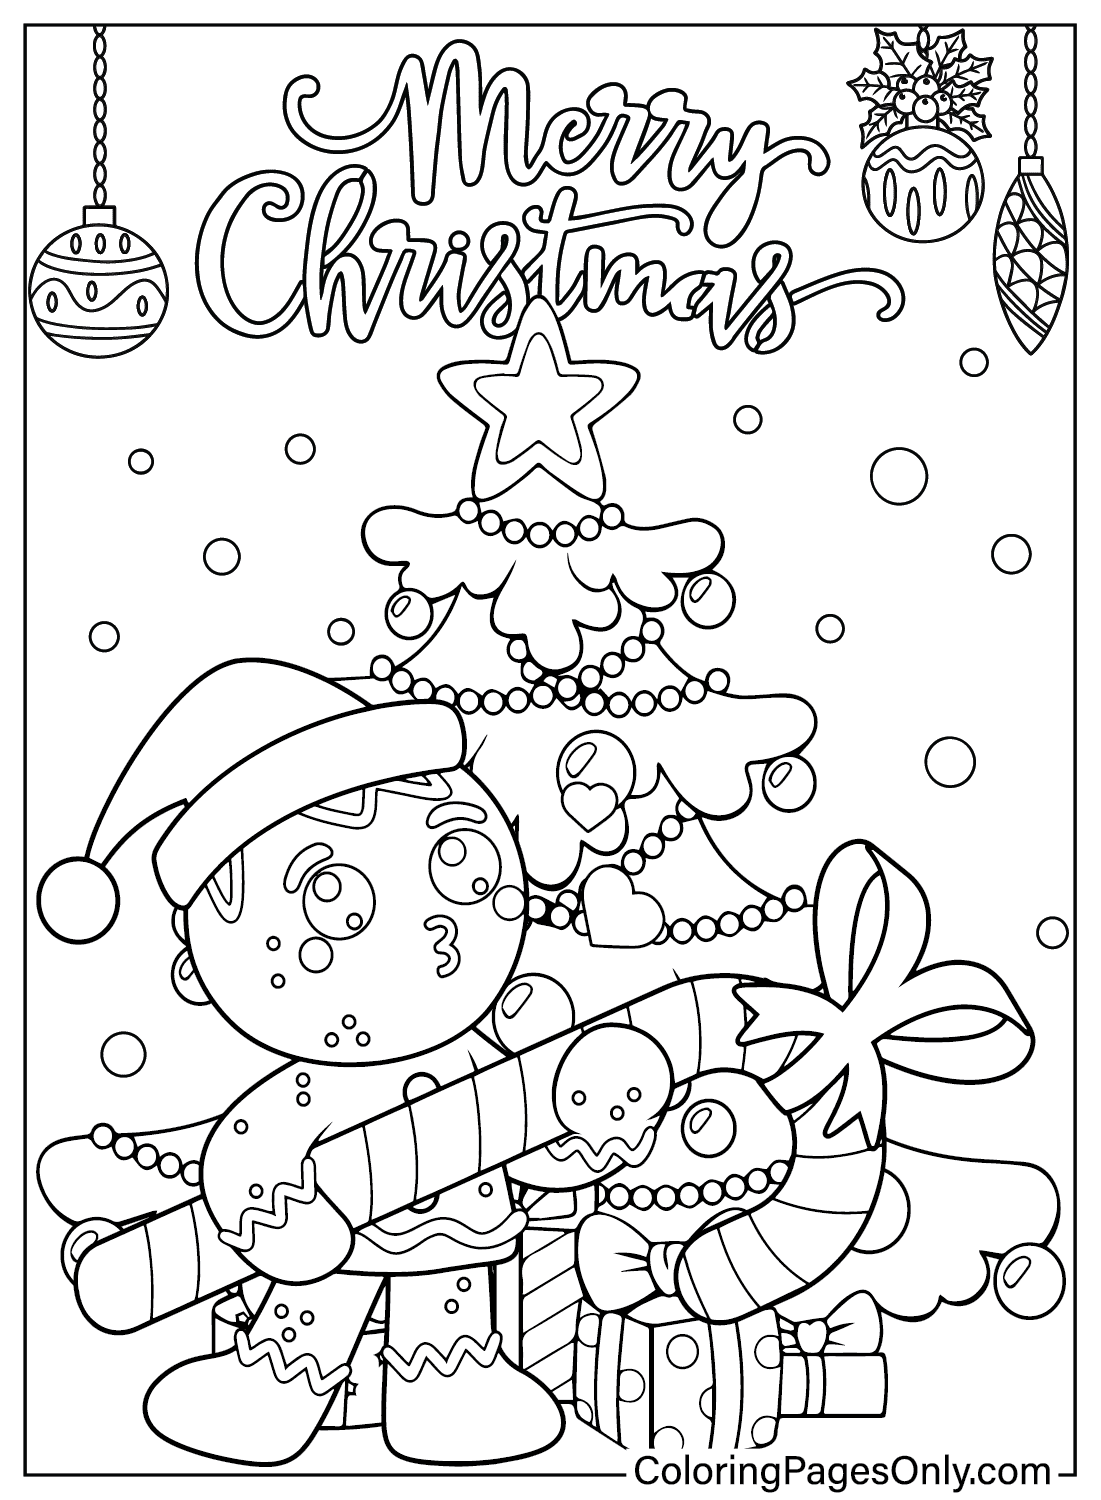 Christmas Candy Cane Coloring Sheet